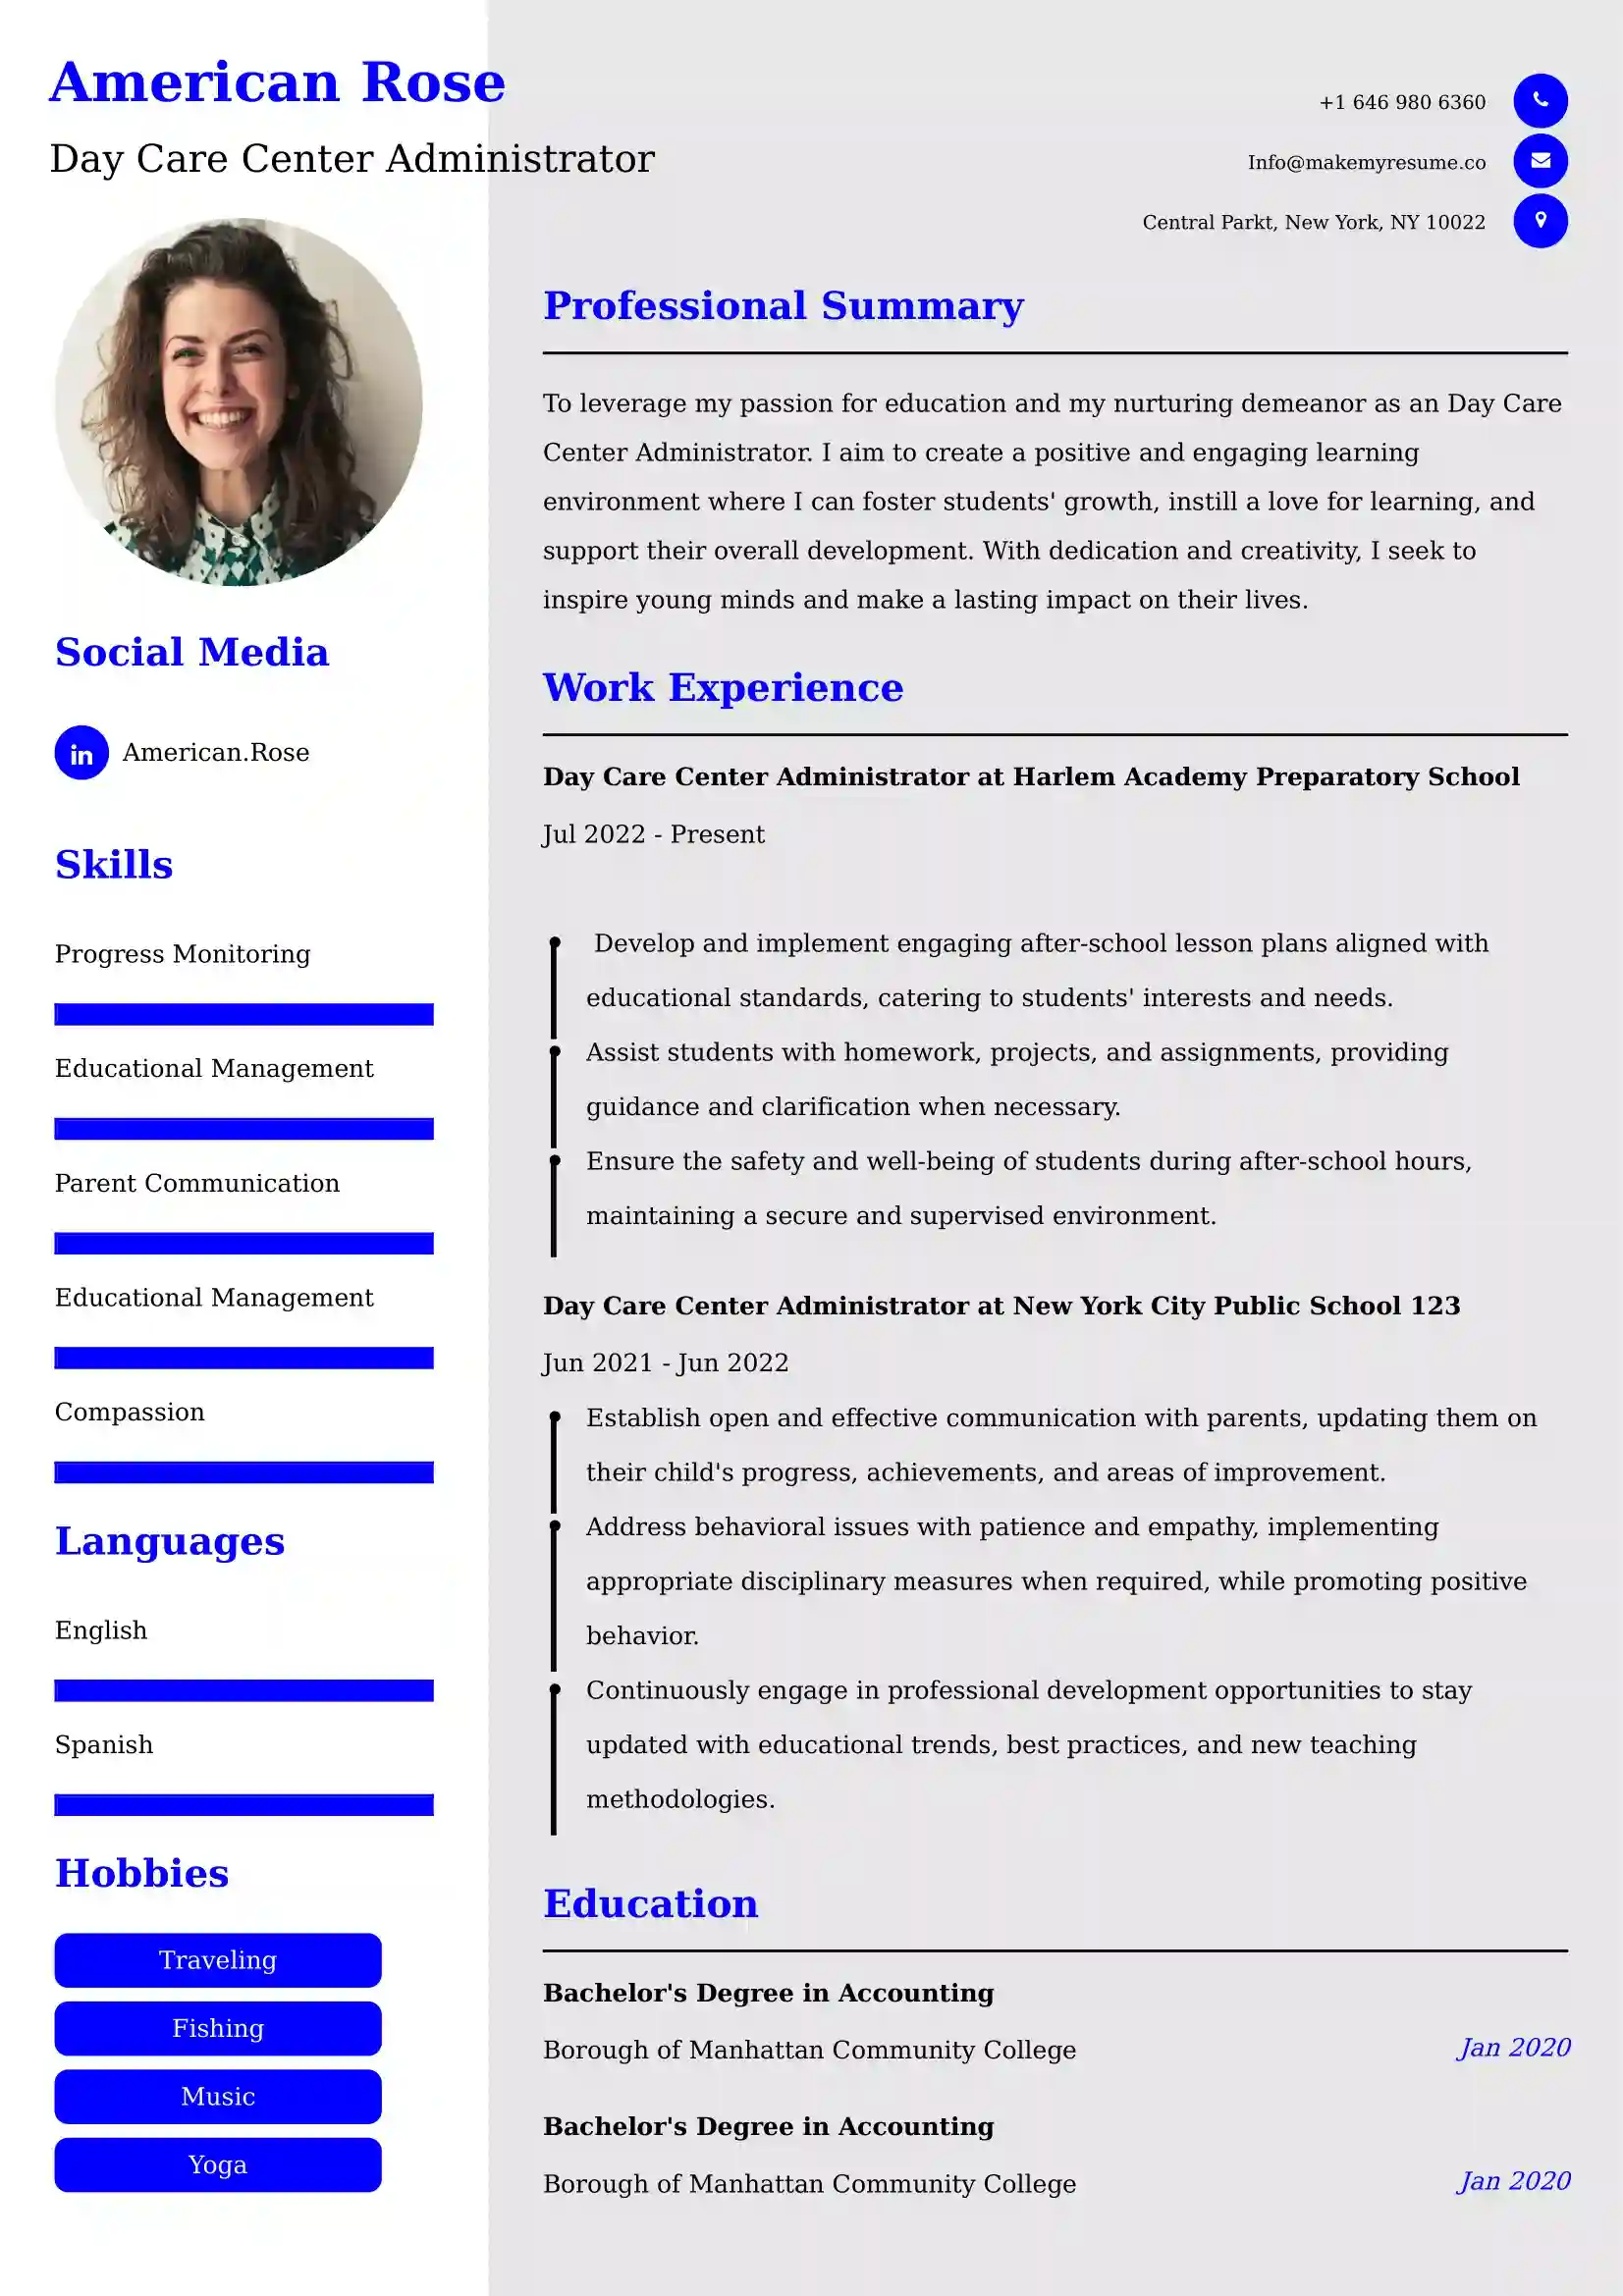 Day Care Center Administrator Resume Examples for UK Jobs - Tips and Guide